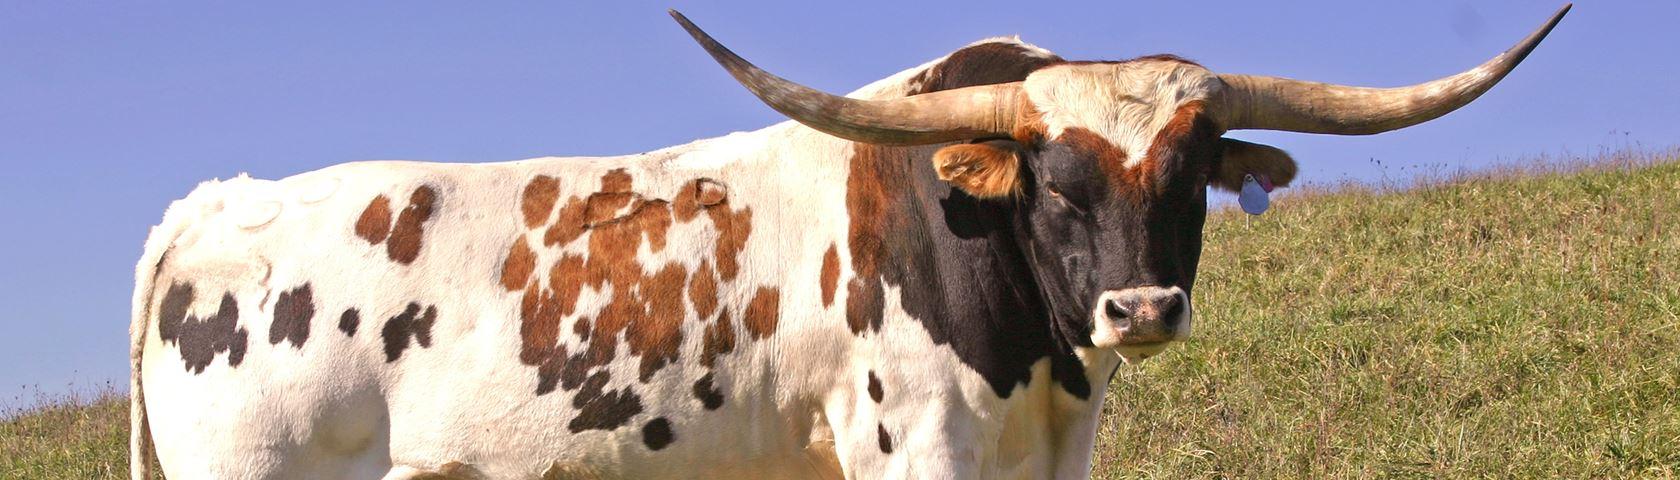 Prize Texas Longhorn Bull • Image • WallpaperFusion